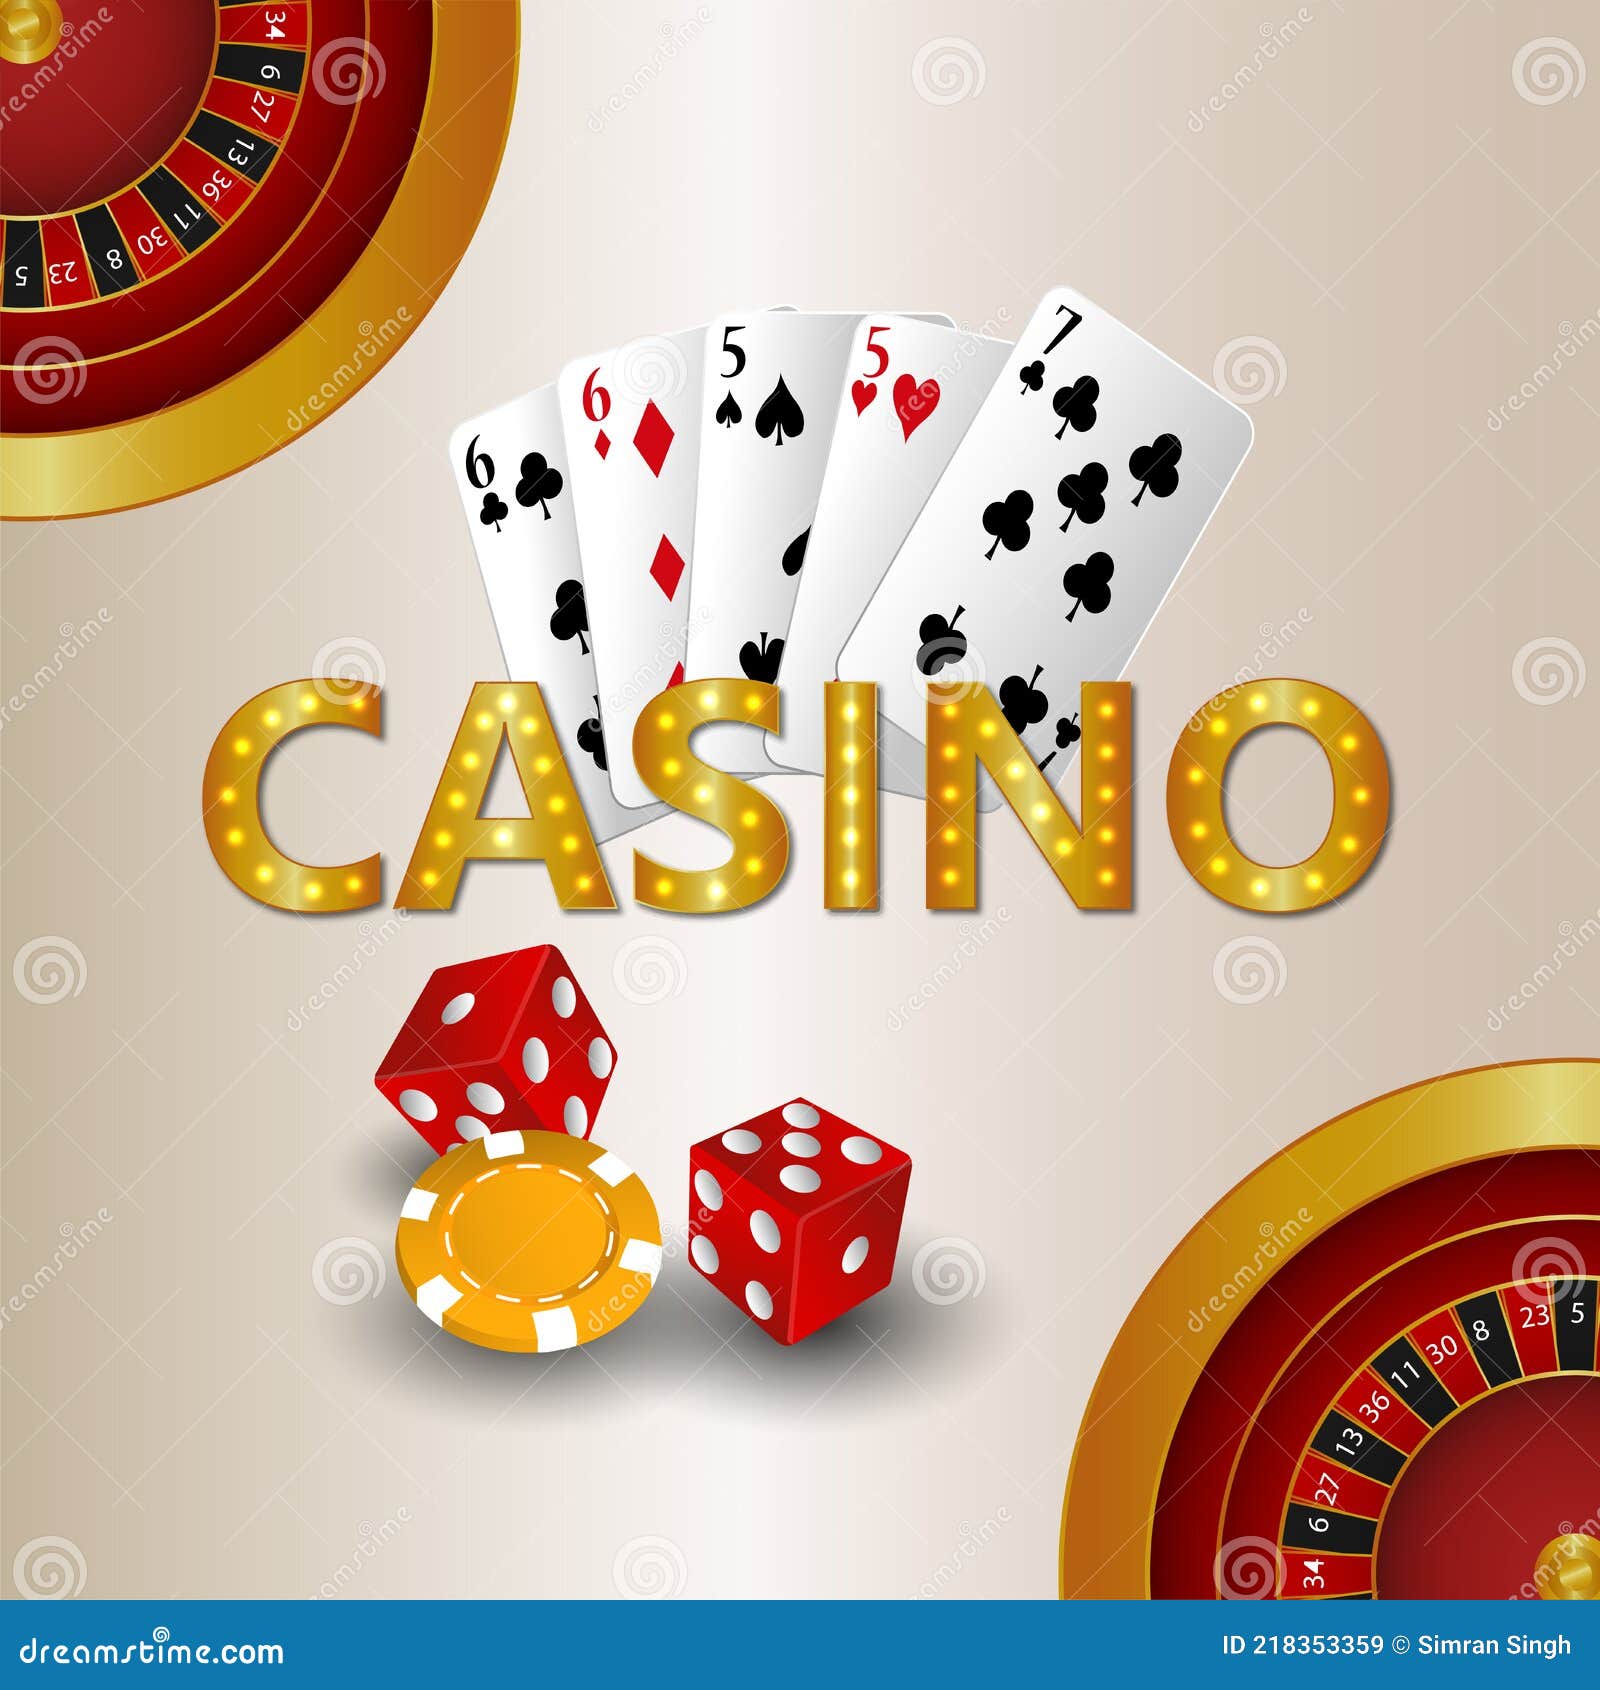 How To Teach Shifting Sands: How Technology Shapes India's Online Casino Scene Like A Pro